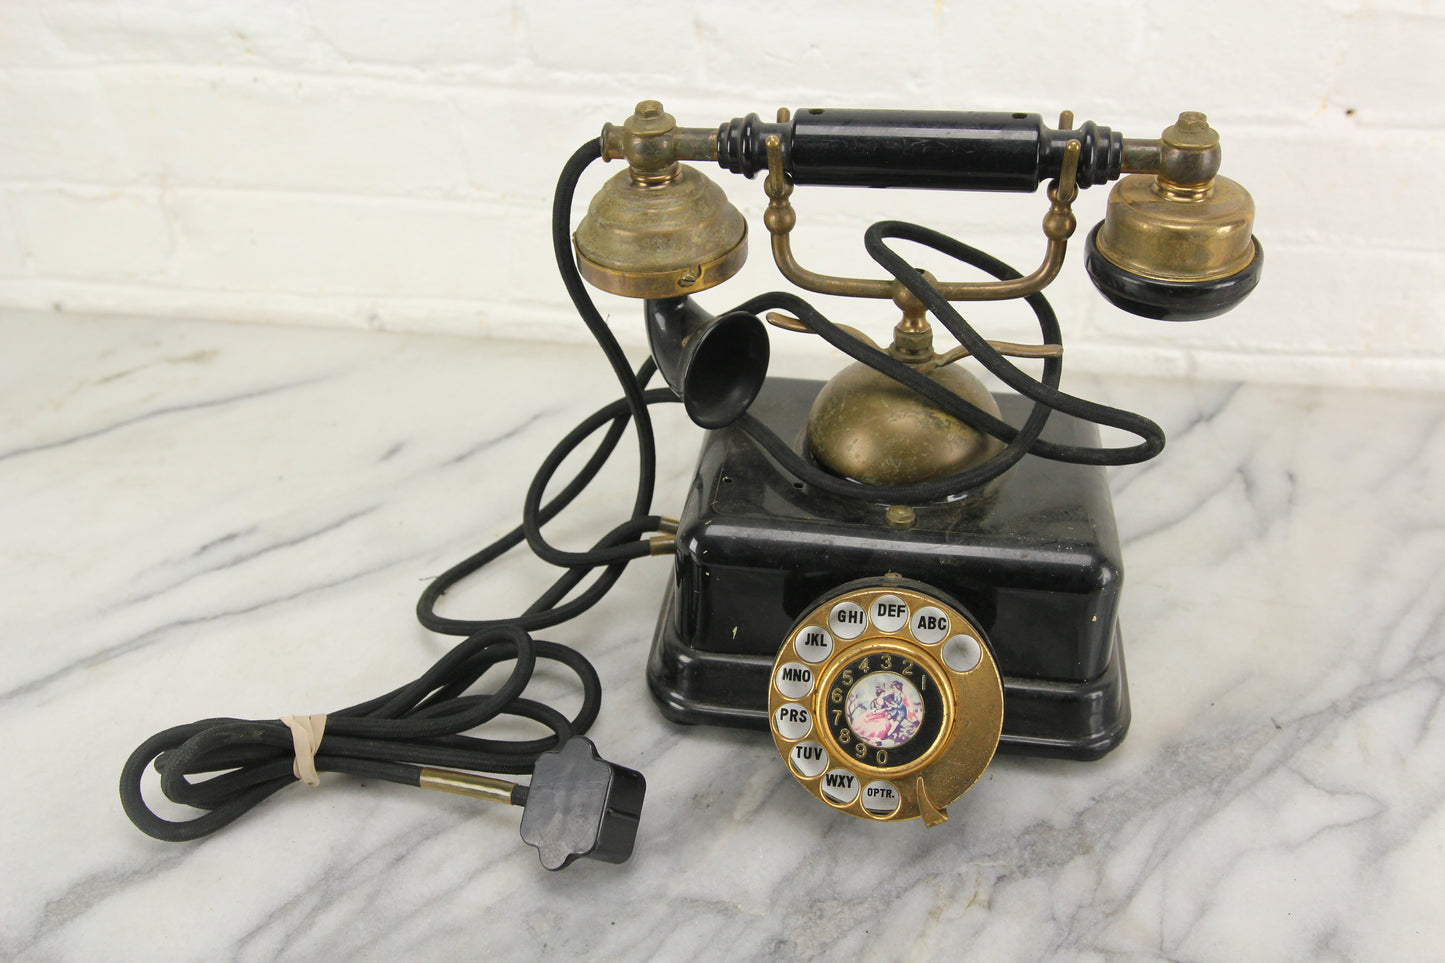 vintage french rotary phones